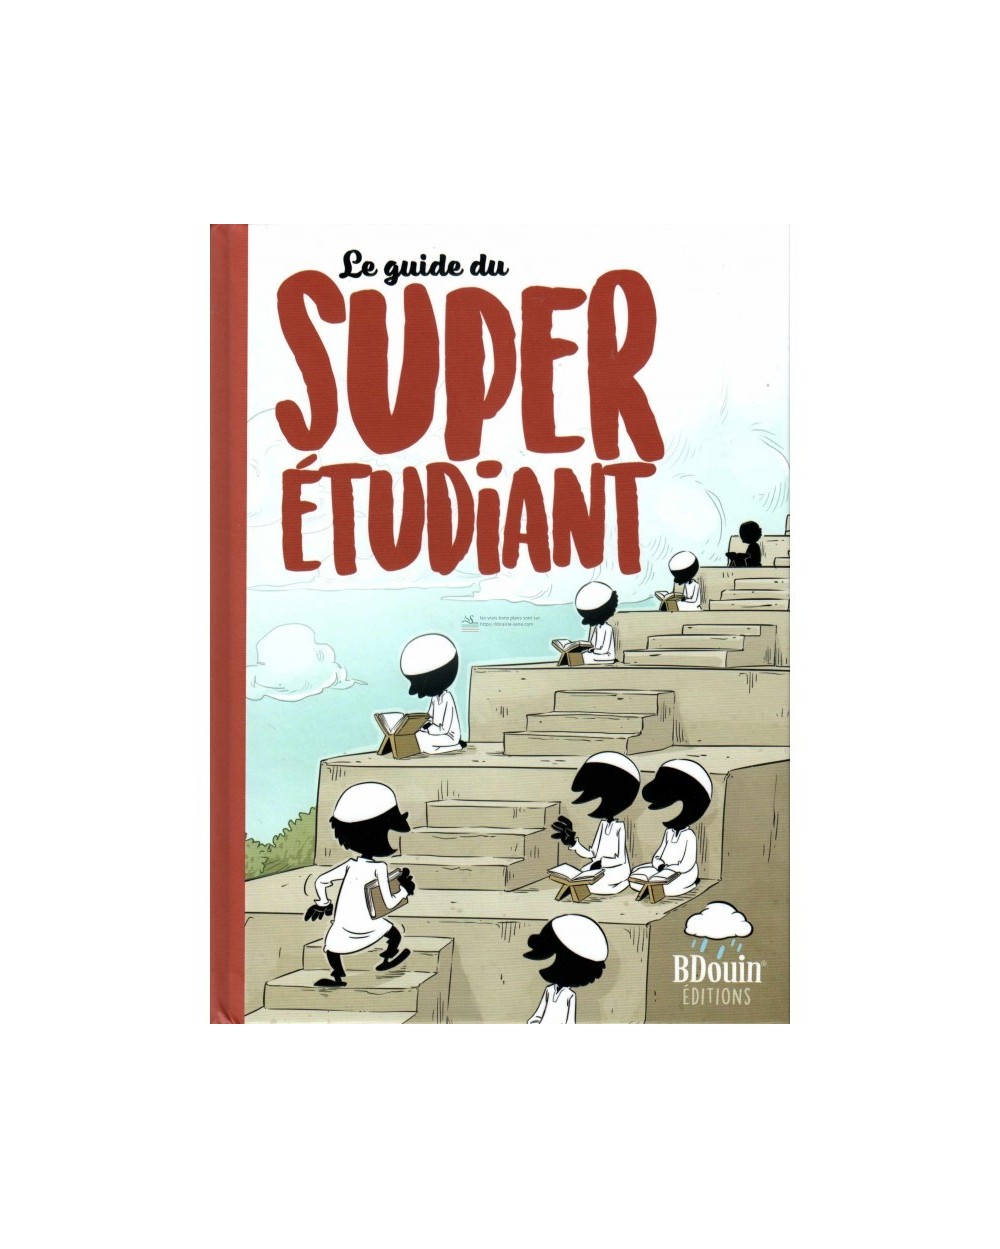 The Super student guide - BDOUIN Editions